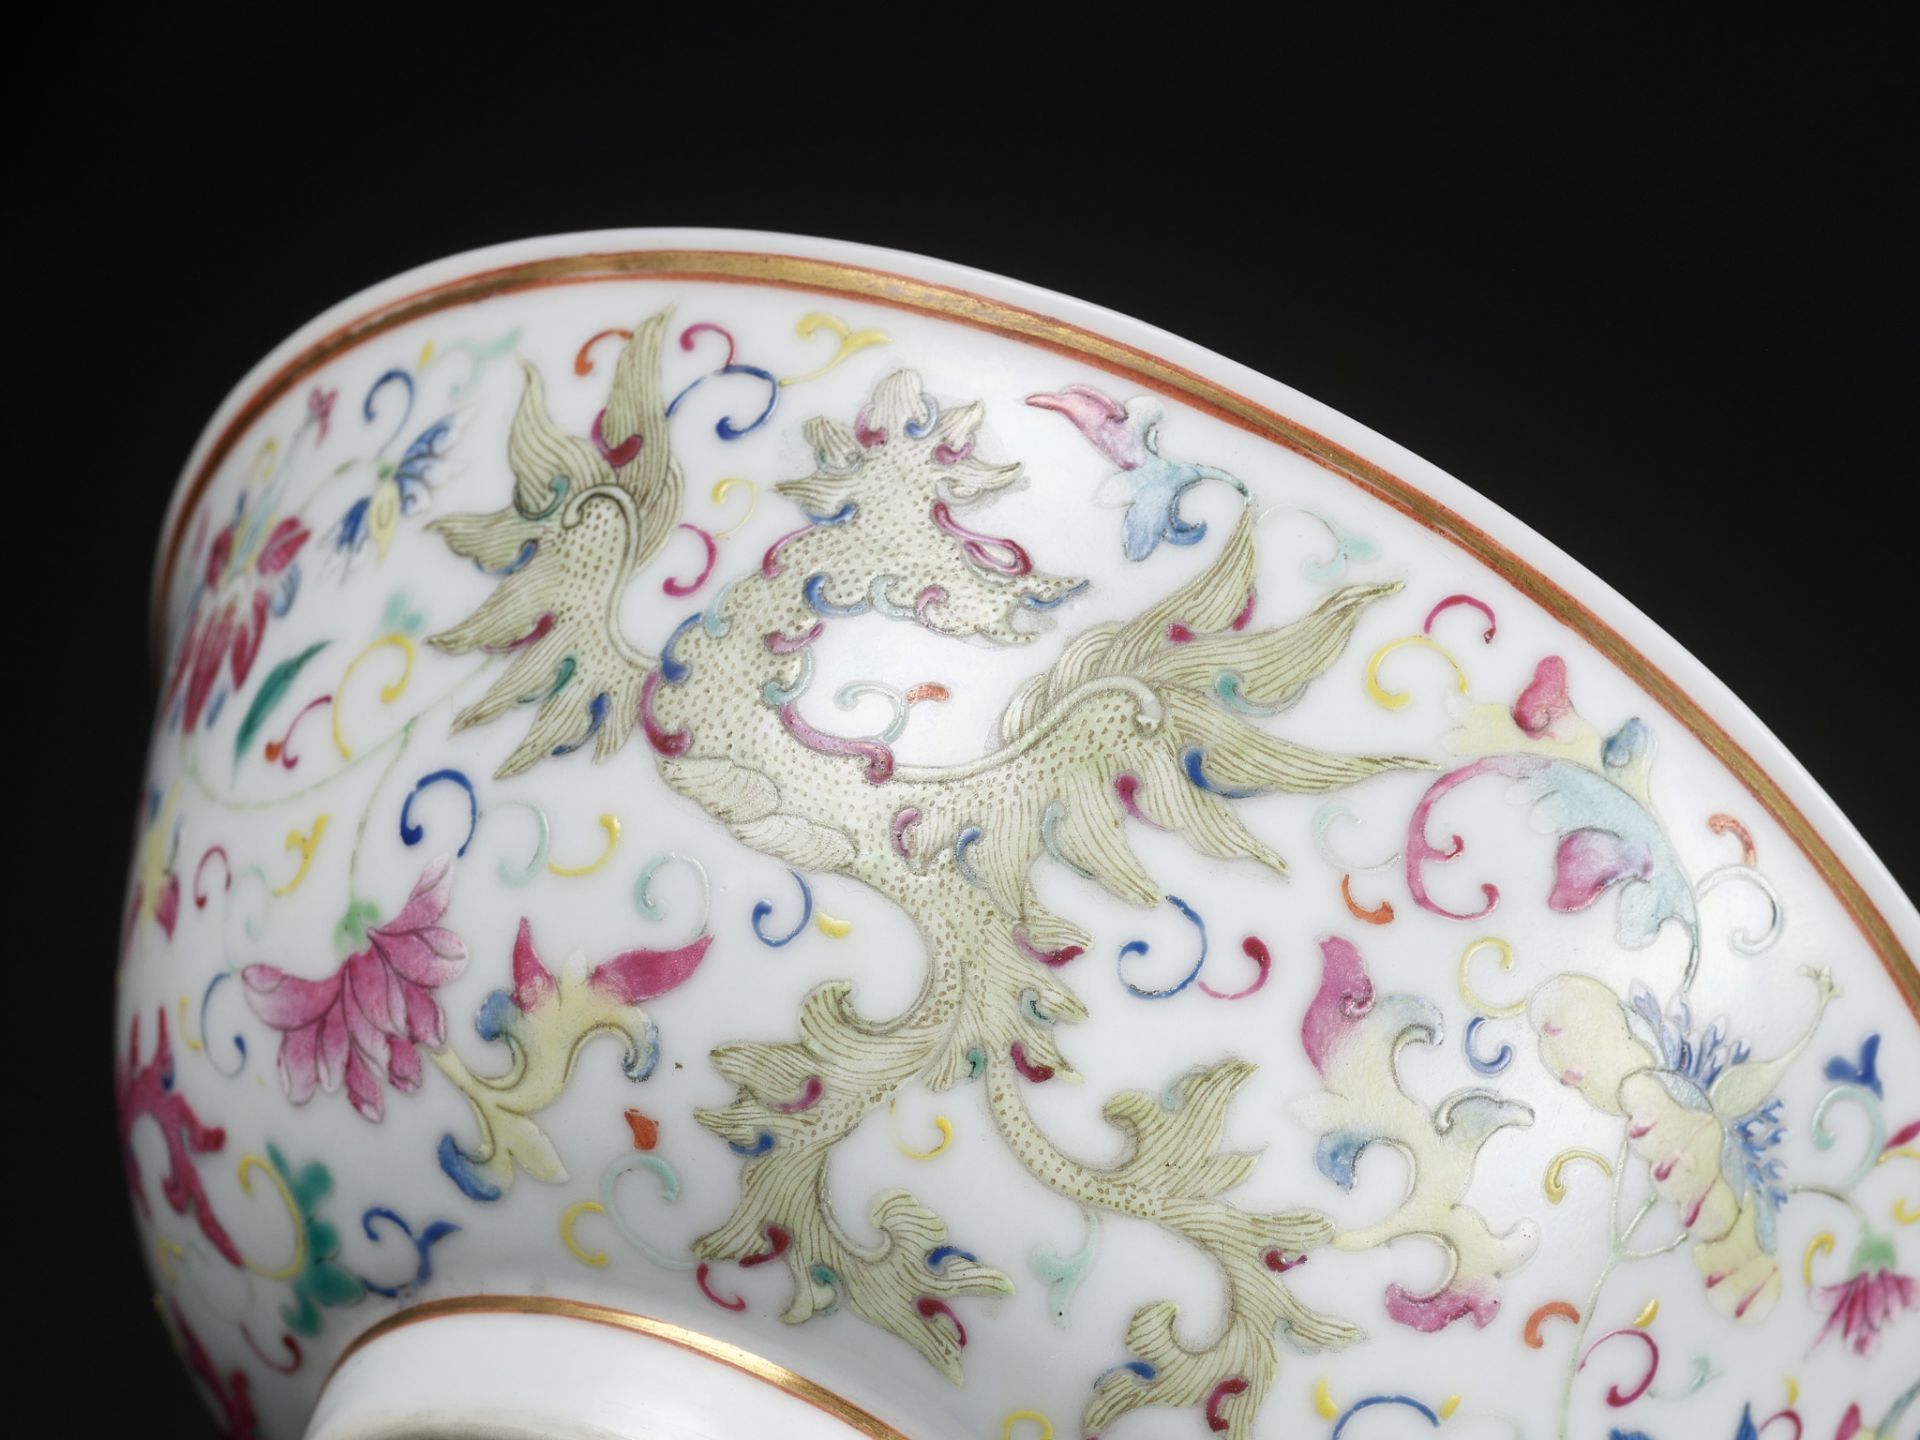 A PAIR OF FAMILLE-ROSE 'PHOENIX' BOWLS, GUANGXU MARK AND PERIOD - Image 14 of 16